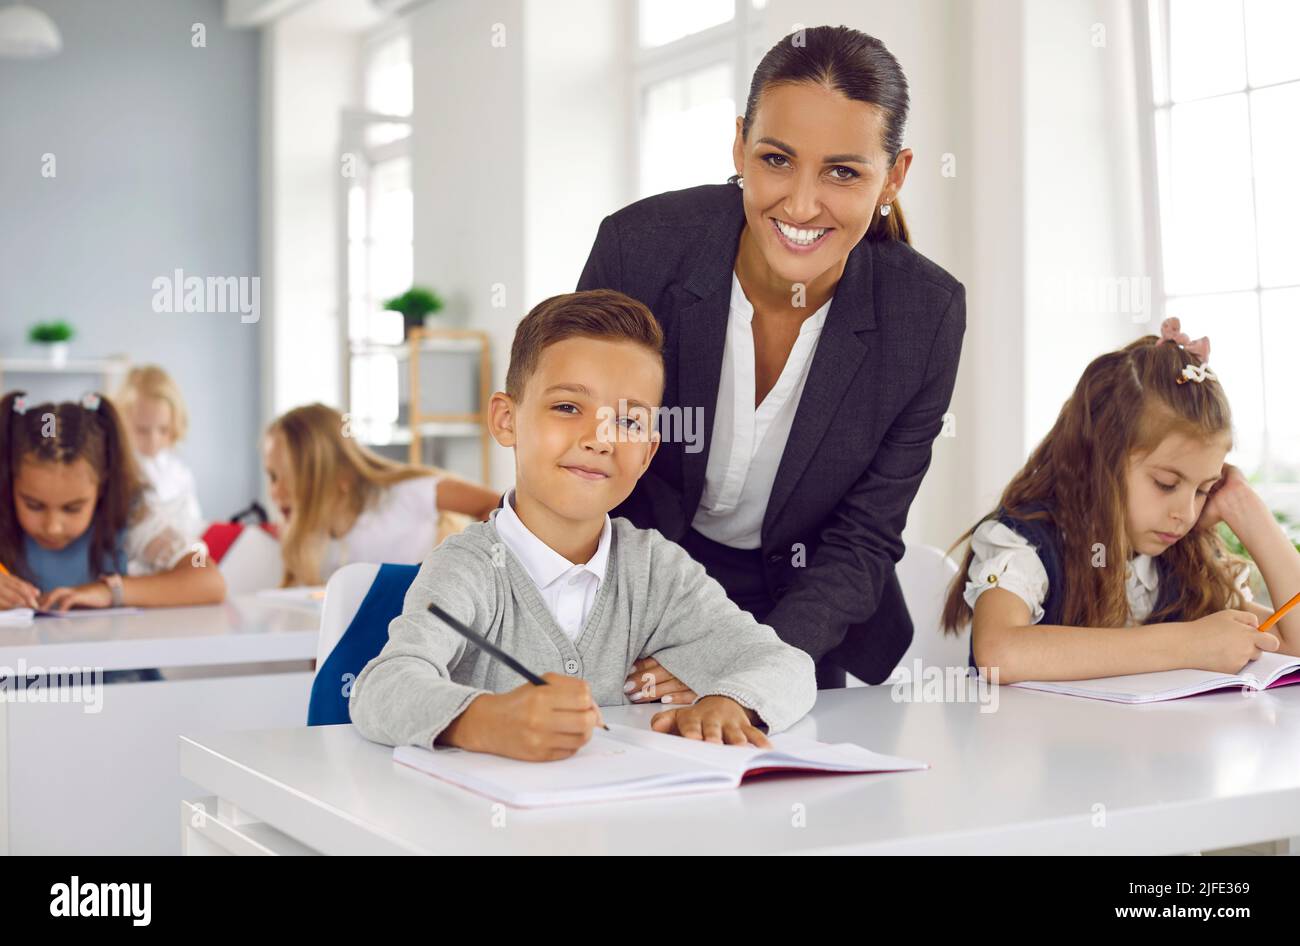 Portrait of happy, smiling school teacher and student during class in the classroom Stock Photo